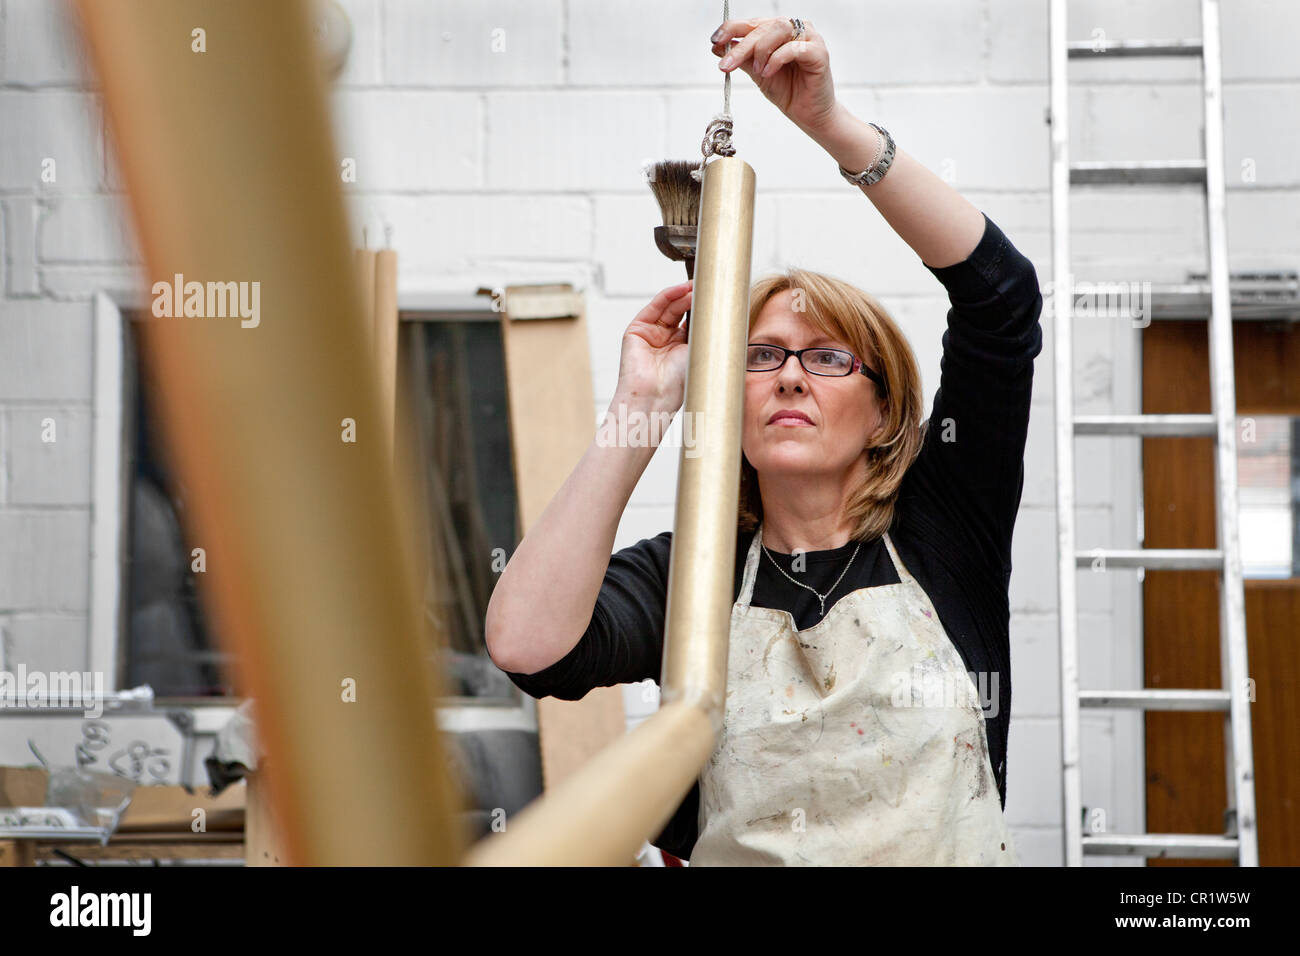 Woman doing manual labour in workshop, England Stock Photo